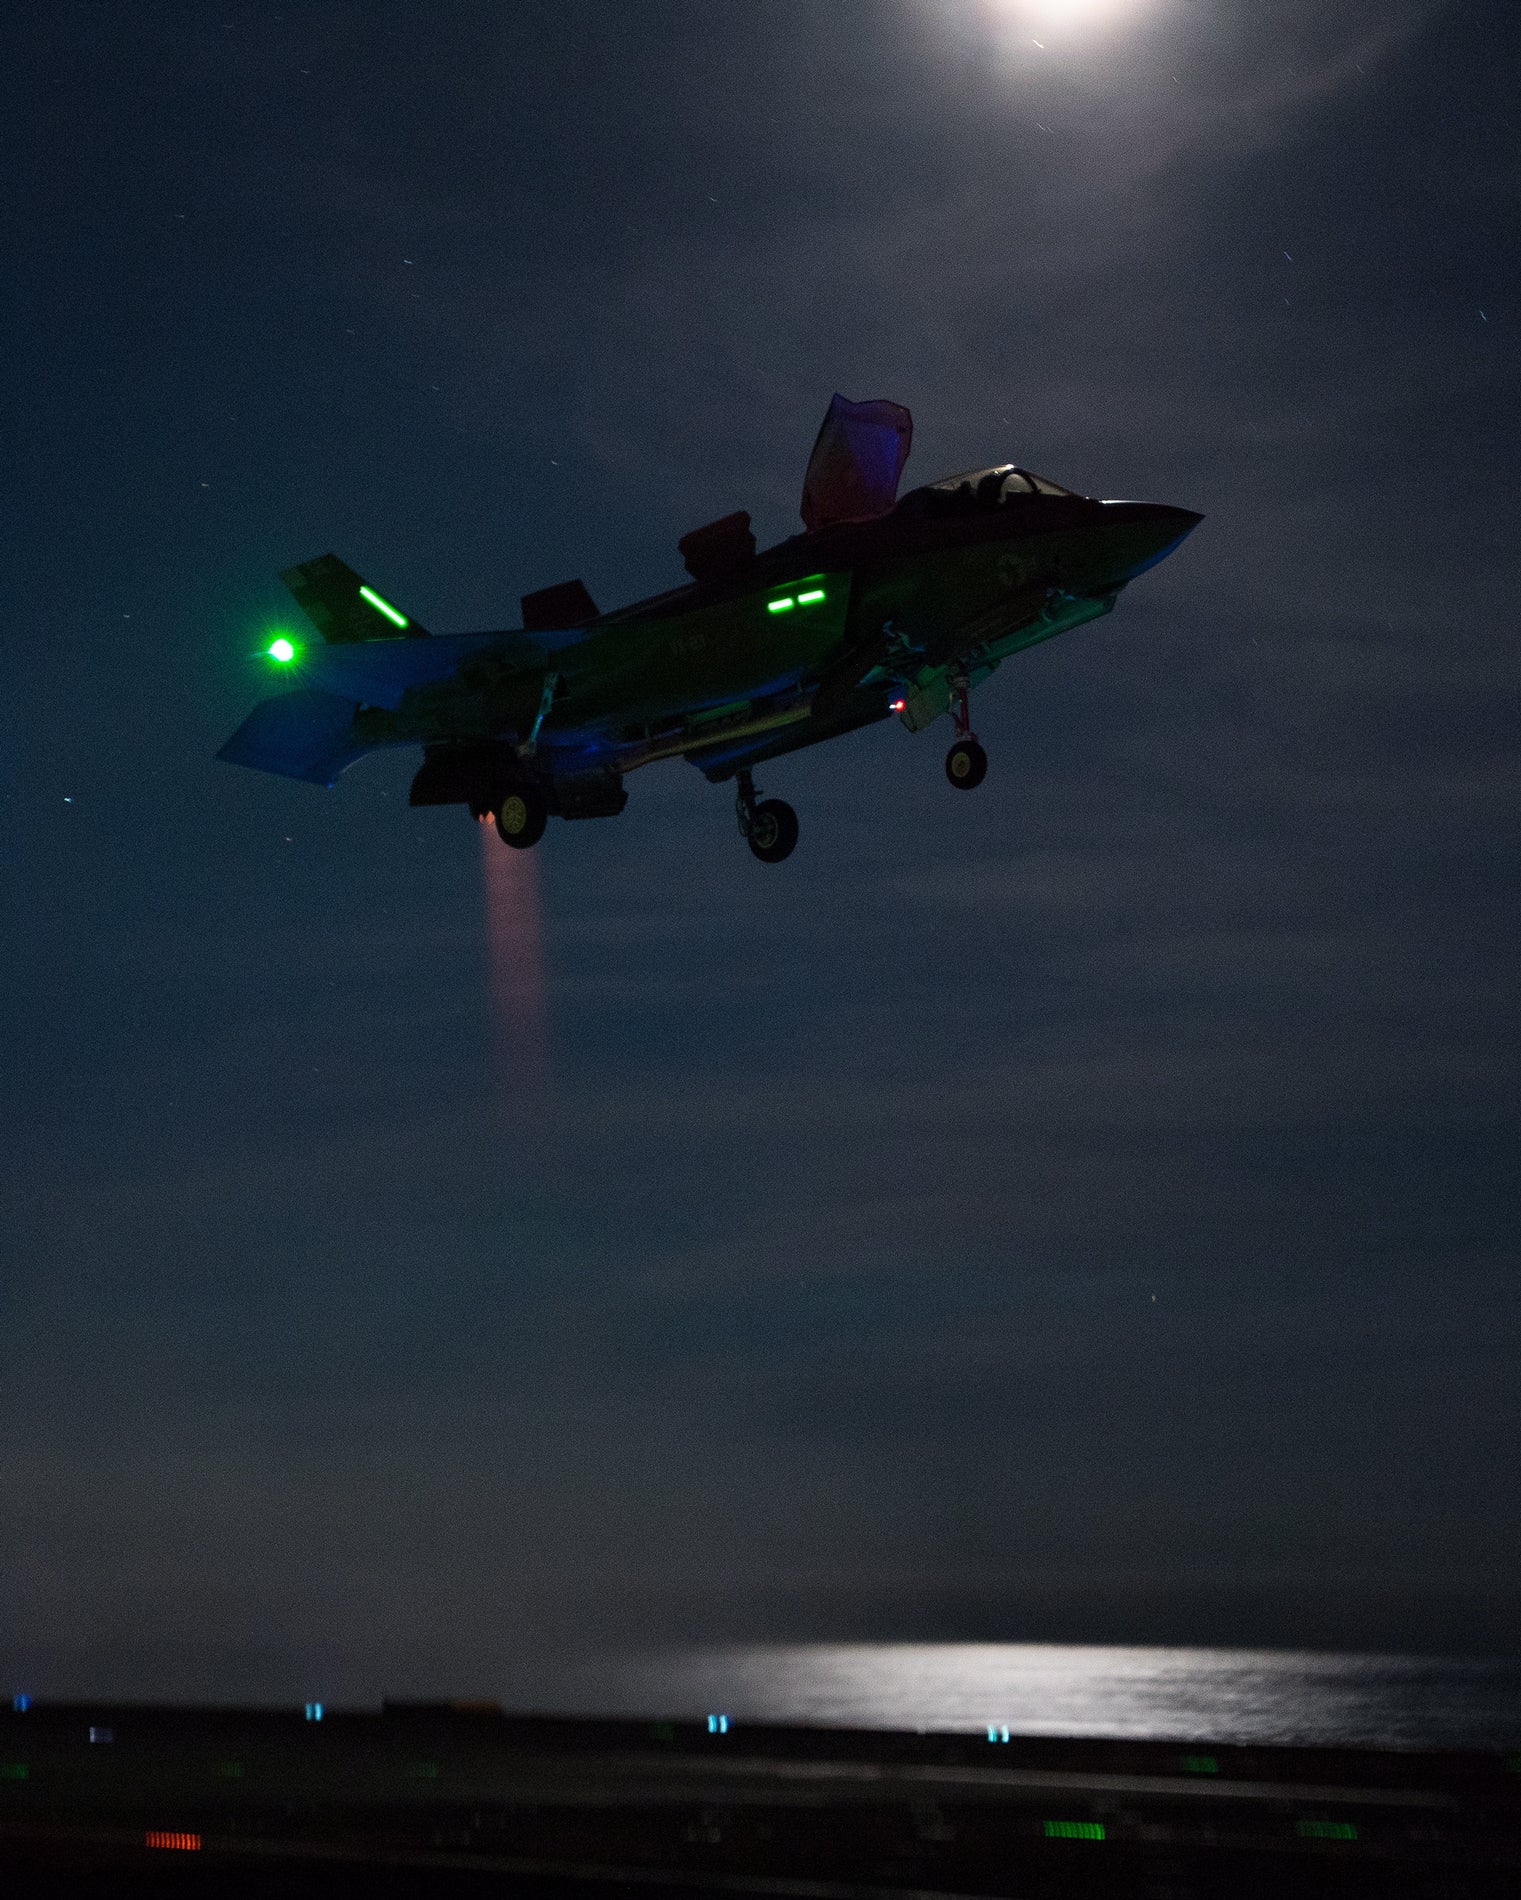 F-35 Lightning fighter jets have conducted their first night flying trials off the United Kingdom’s largest warship, HMS Queen Elizabeth.

The aircraft carrier, which first landed F-35 Lightning jets on board last week, is currently conducting flight testing off the east coast of the United States.

Pictures show how the night time trials, which up until now have only been tested in simulators or on the ground, were carried out using state-of-the-art night-vision technology, with the pilots and aircraft handlers successfully guiding the supersonic fighter jets onto the flight deck.

Some trials were also carried out without night vision technology to ensure the jets’ capability in any eventuality.